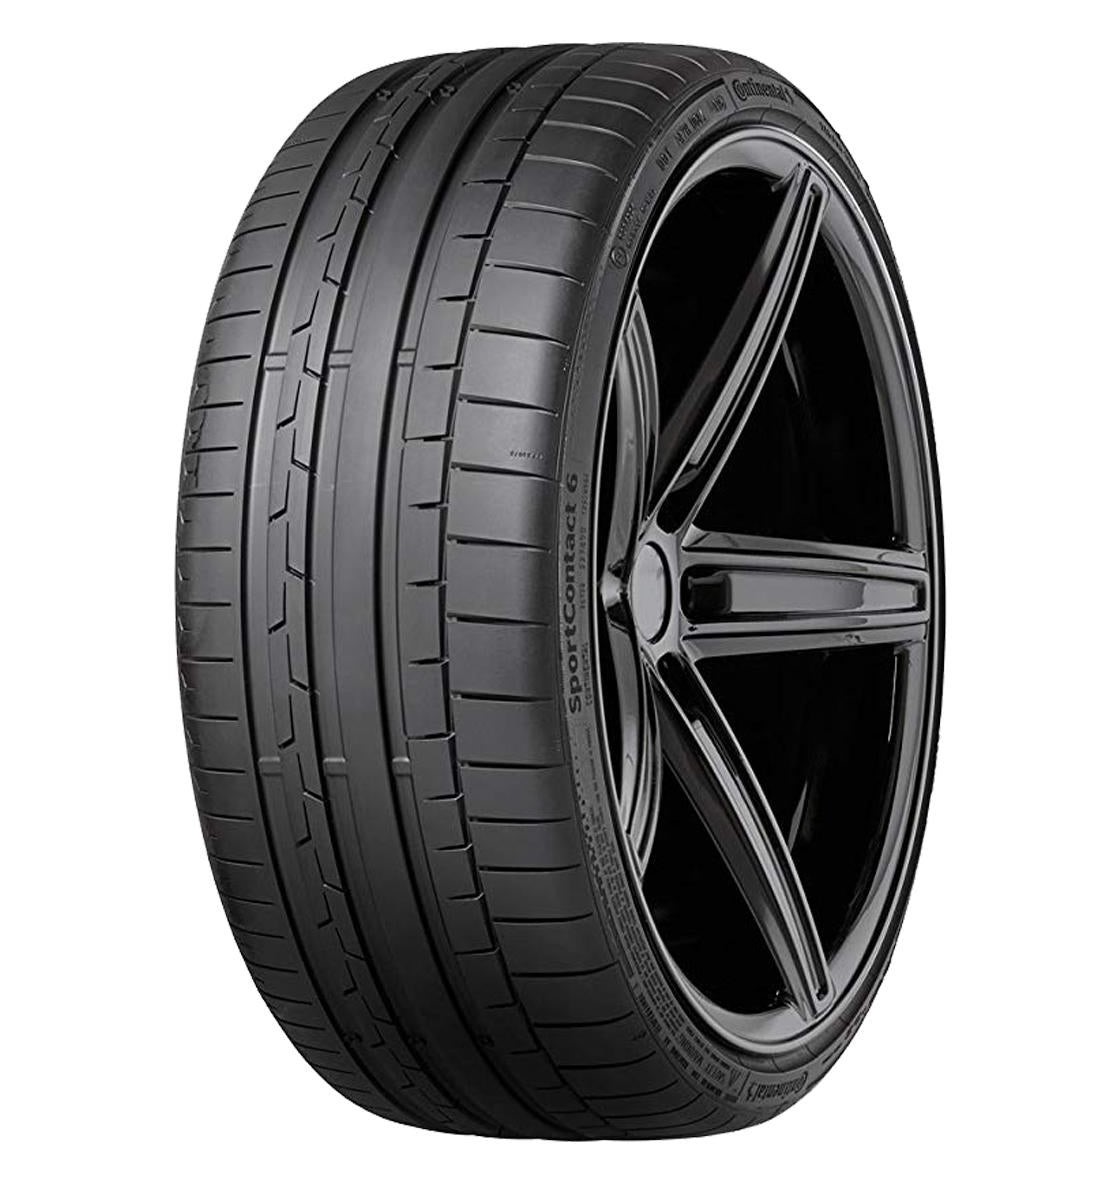 SportContact 6 MO-S SIL 315/40R21